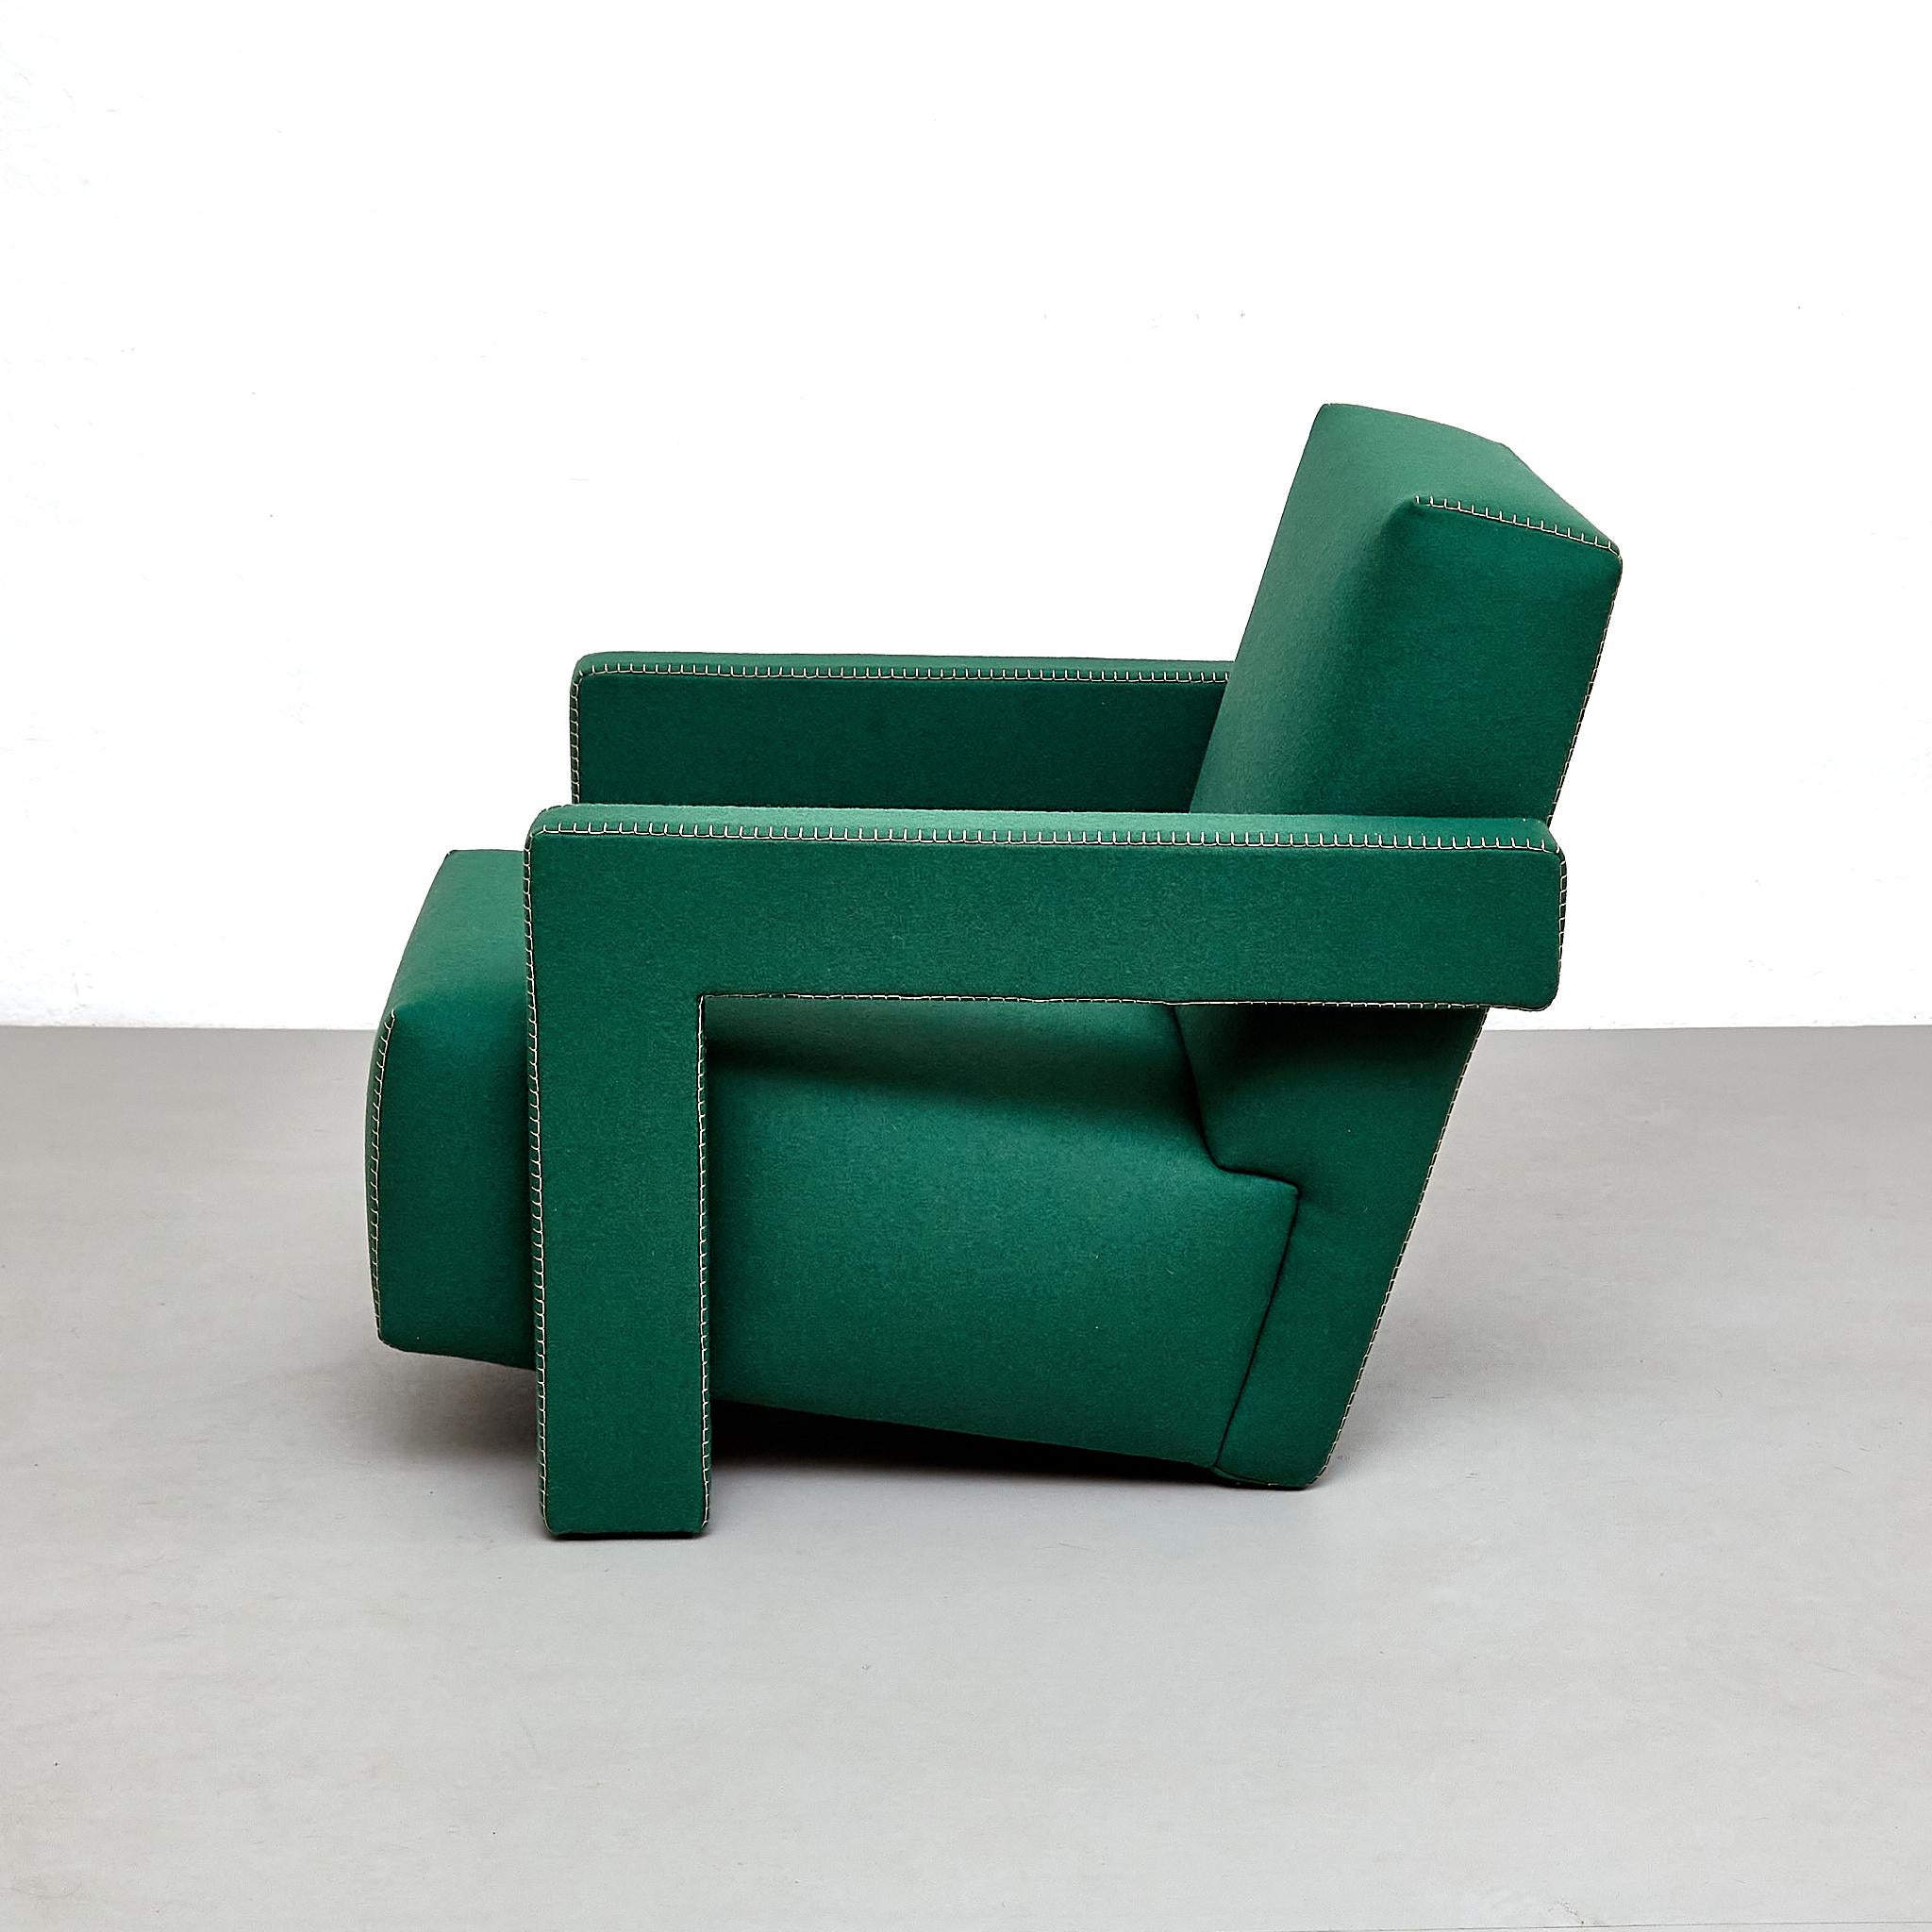 Armchair designed by Gerrit Thomas Rietveld in 1935. Relaunched in 2015.

Manufactured by Cassina in Italy.

Materials:
Fabric
 
Dimensions:
D 85 cm x W 64 cm x H 60 cm (SH 37 cm)

Gerrit T. Rietveld came up with the design for the Utrecht